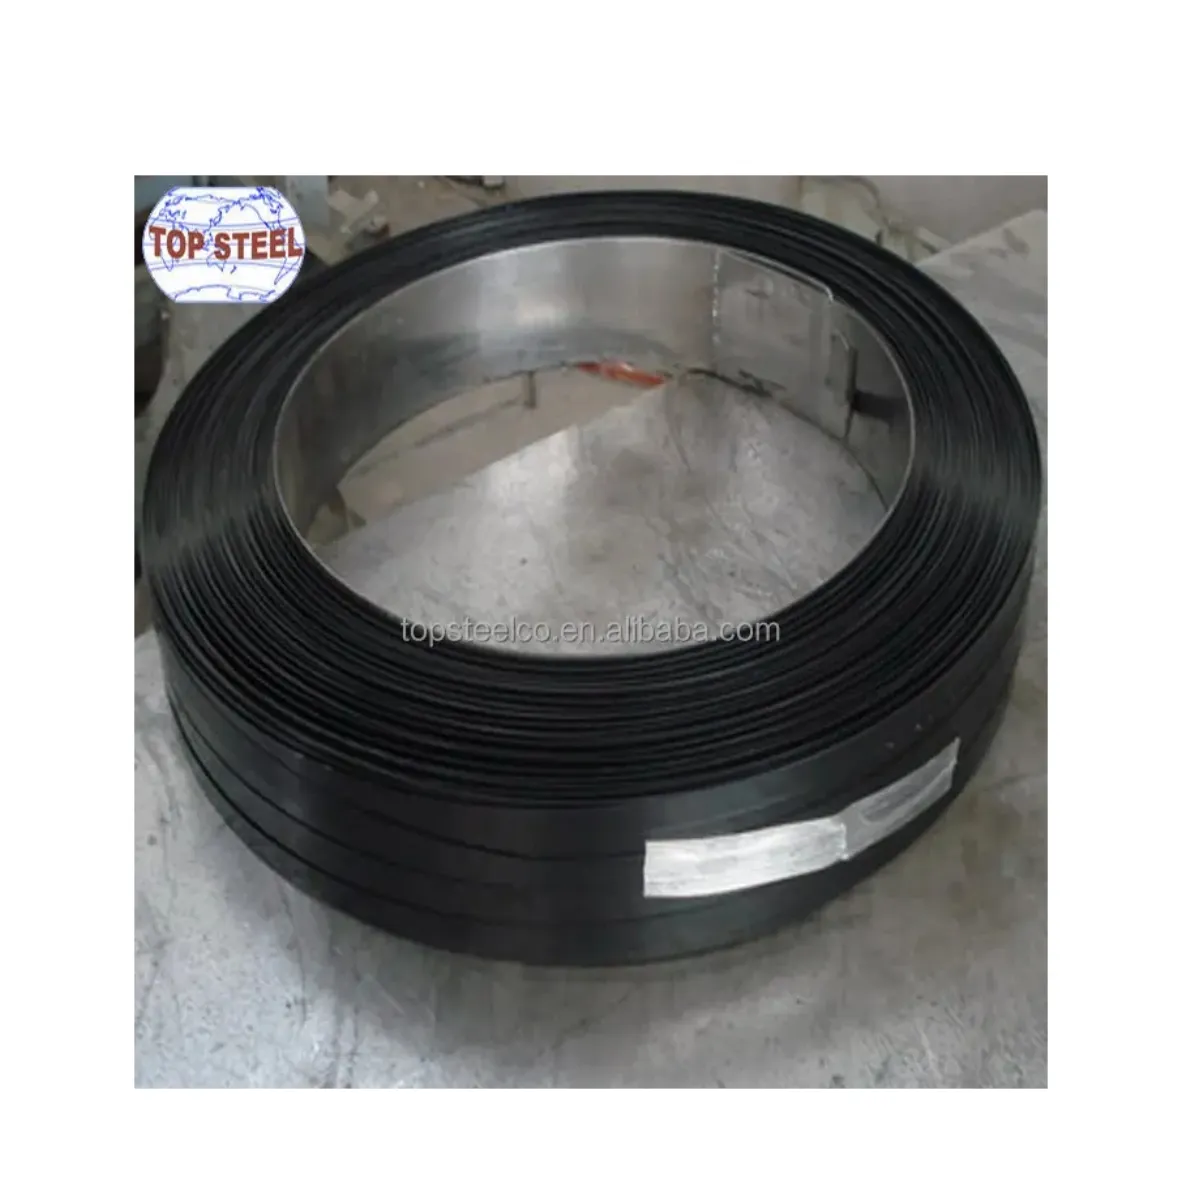 16mm 19 mm 22mm 25mm 32mm 38mm black painted steel binding bundle with strapping for packing 19x0.5mm price per kg